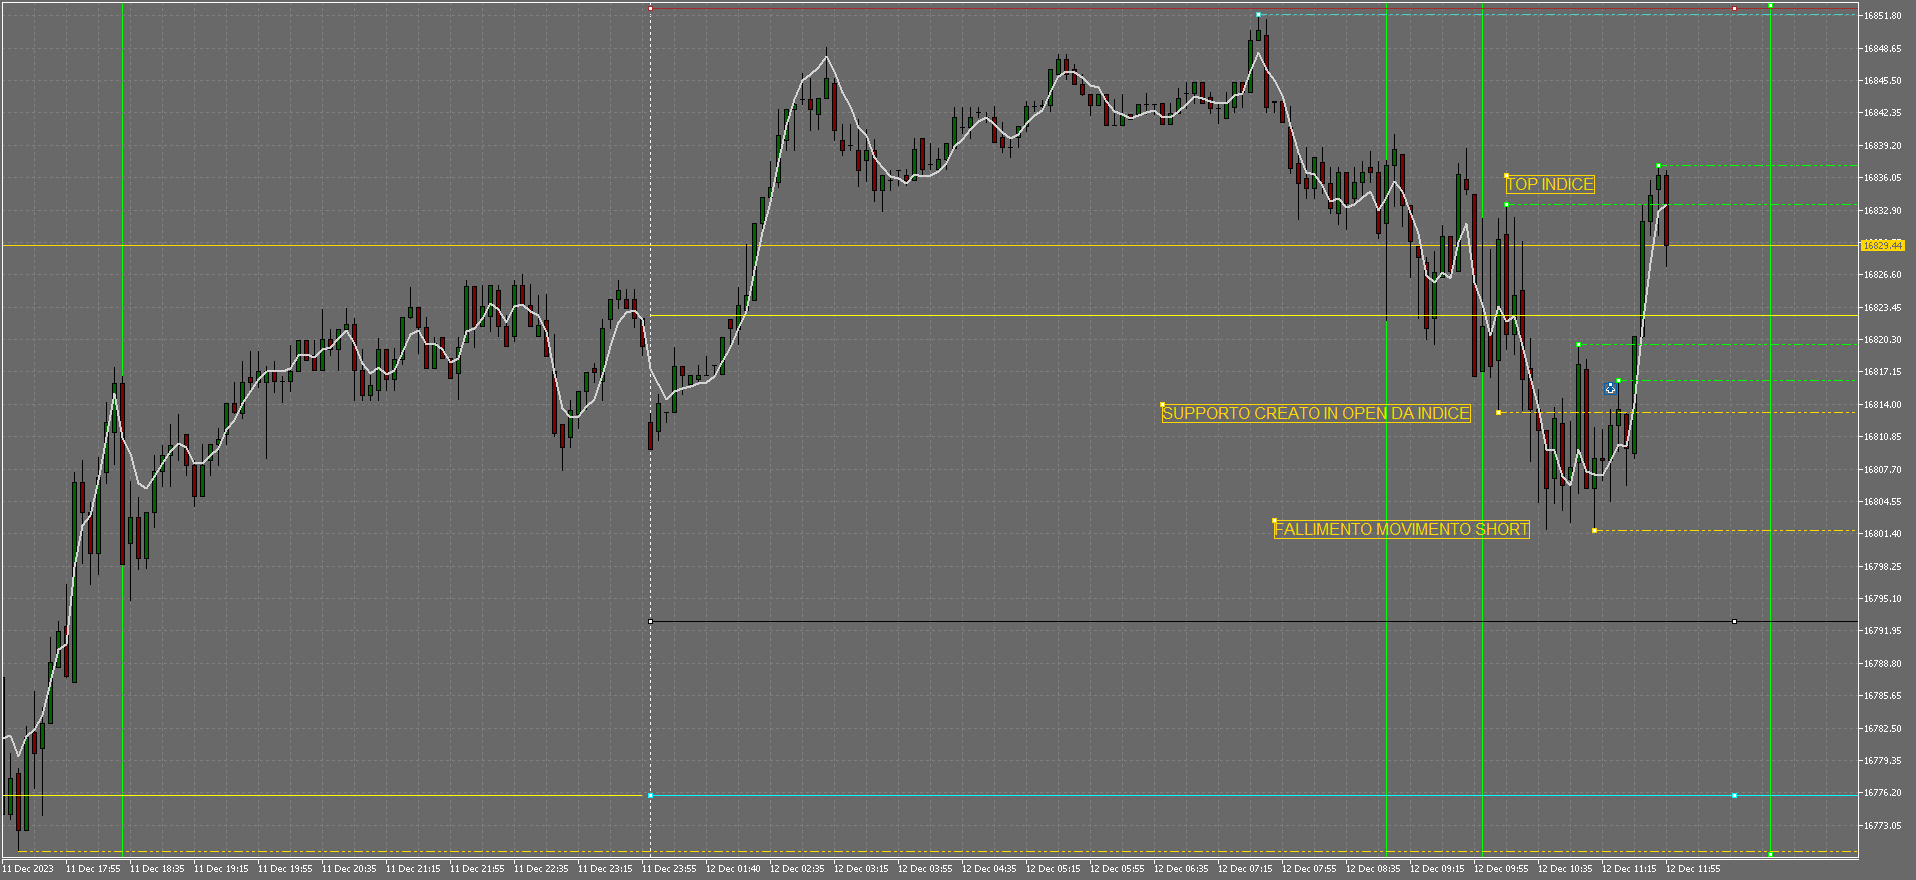 dax40-m5-admiral-markets-group.png